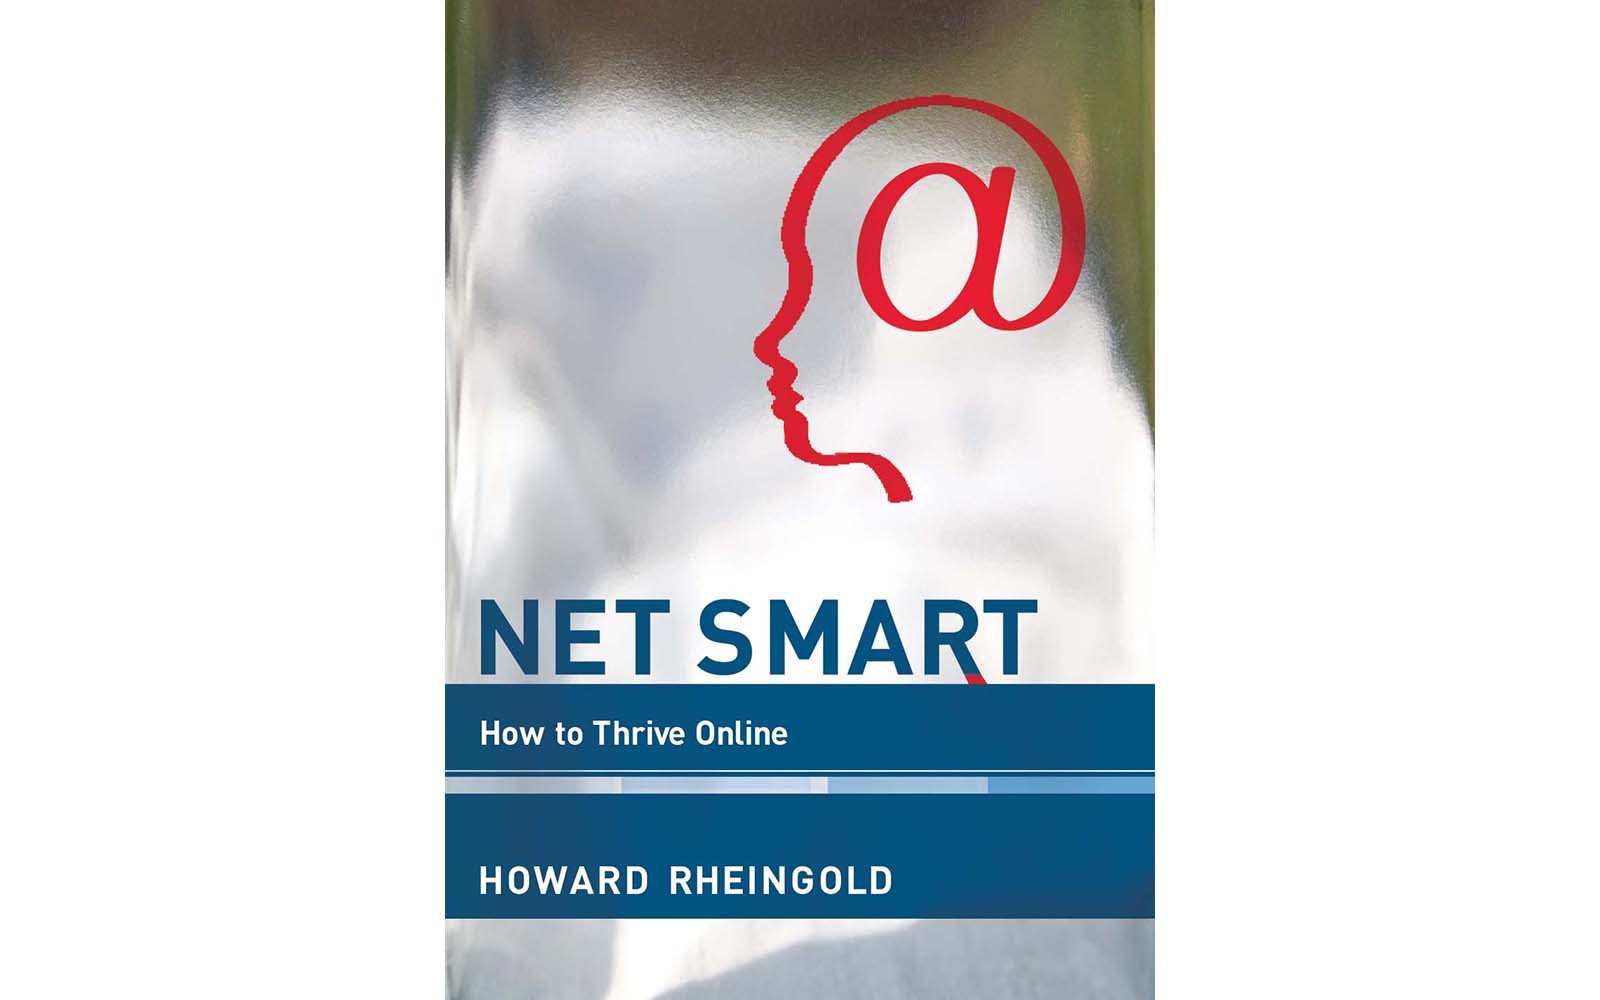 Net Smart: How to Thrive Online - BY HOWARD RHEINGOLD - THE MIT PRESS